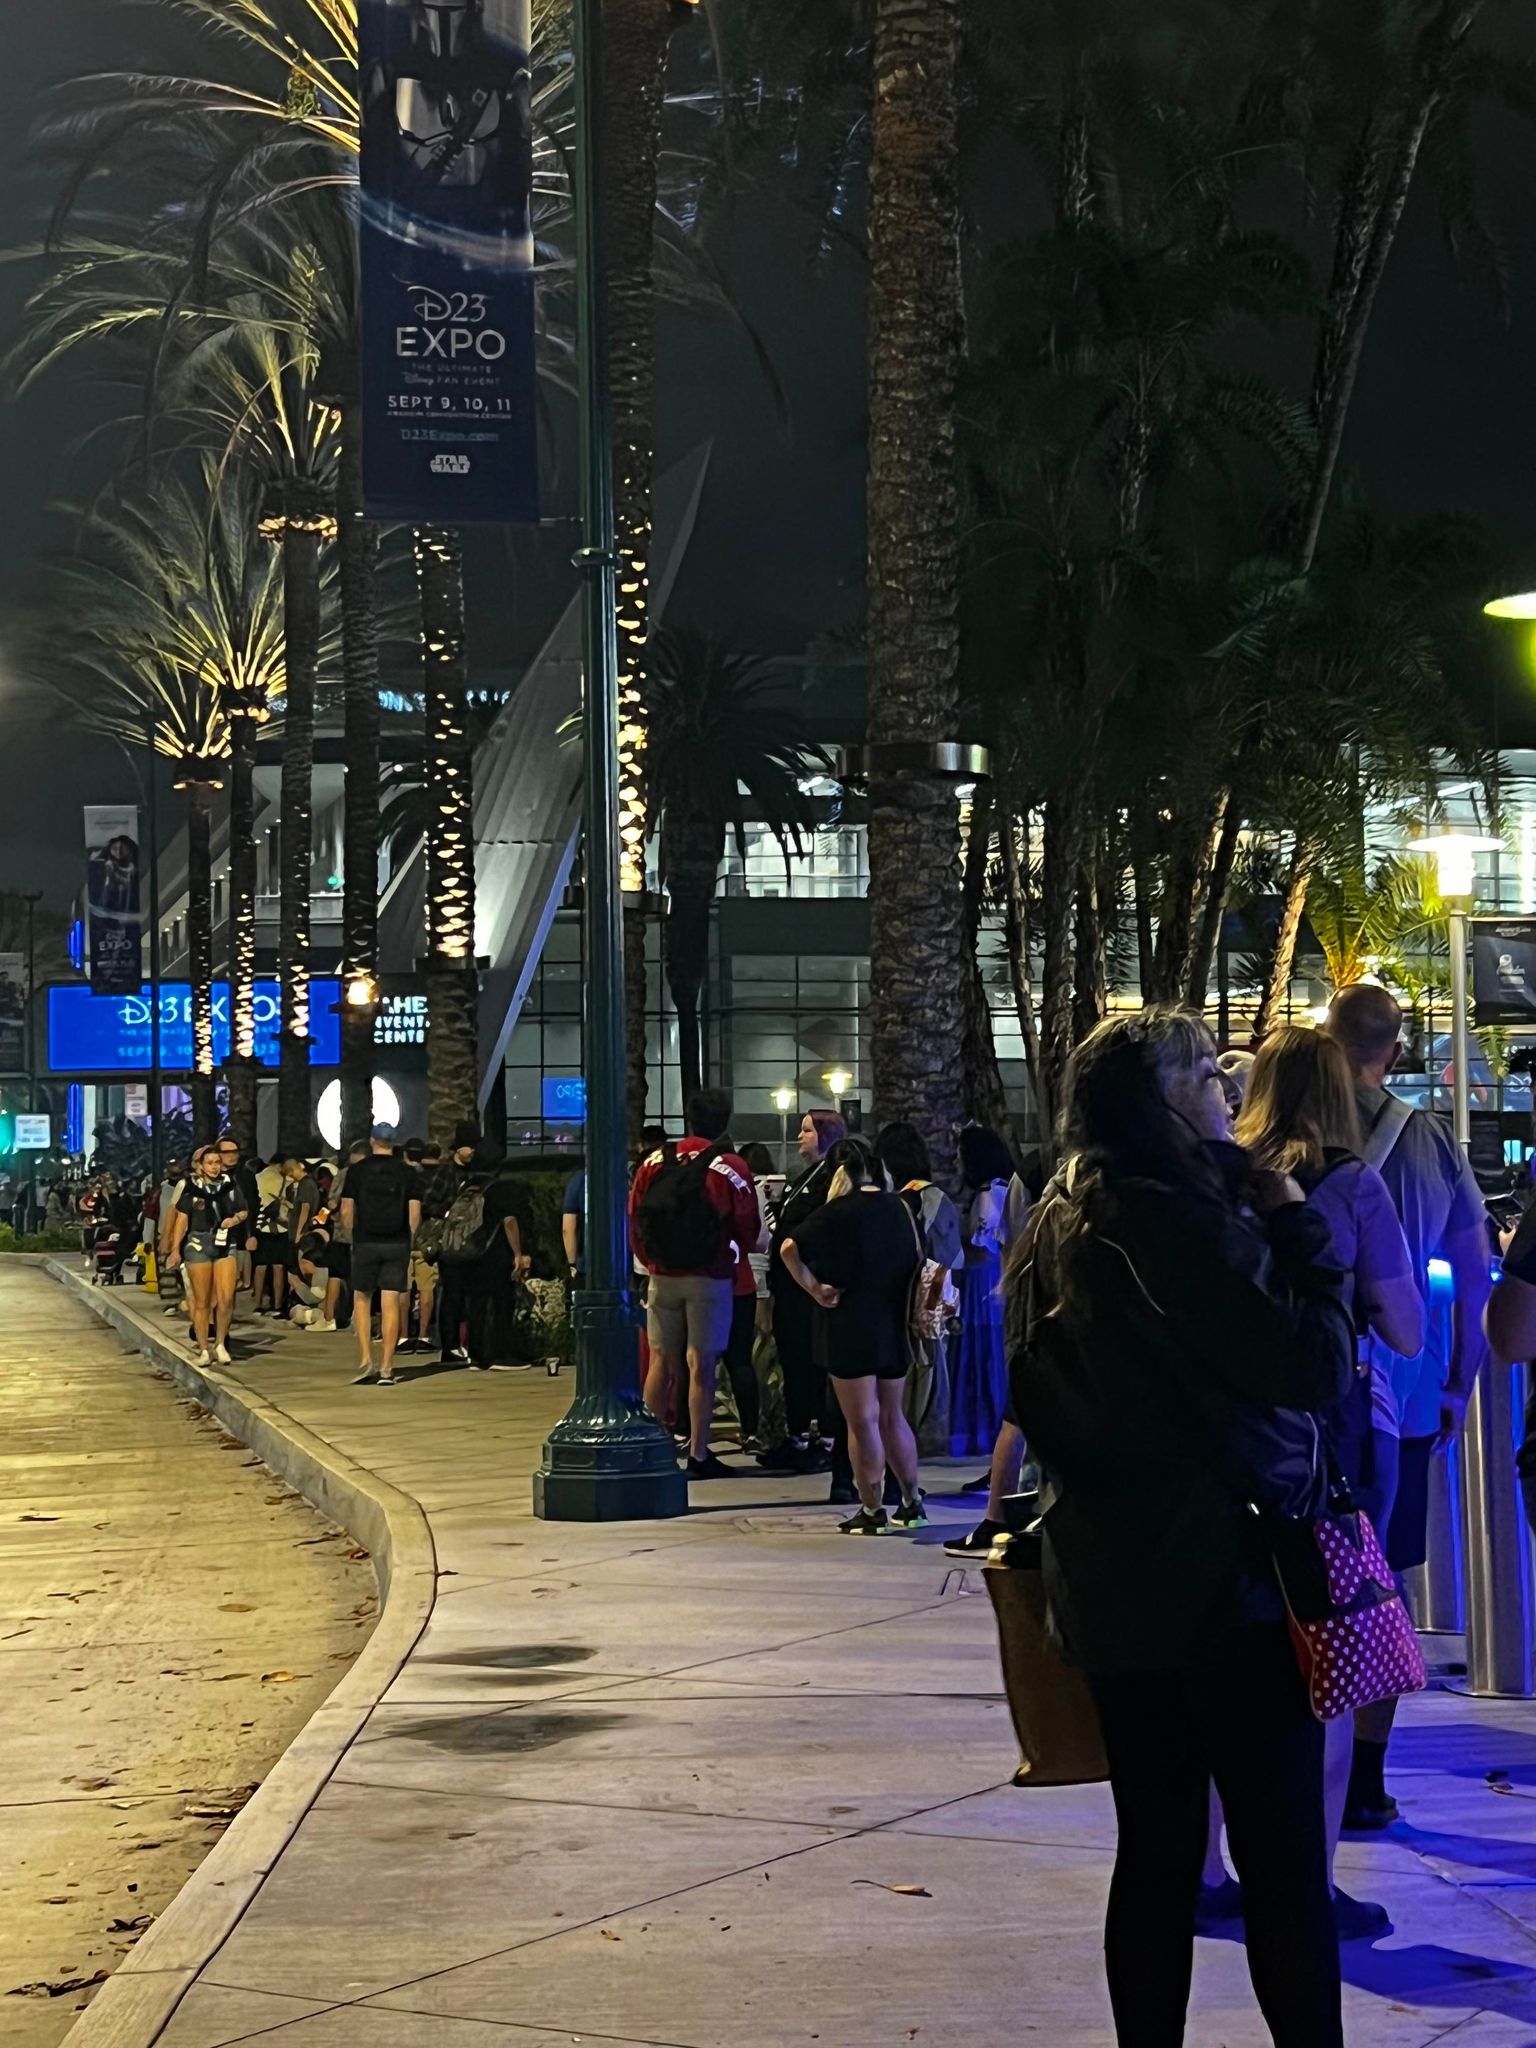 d23 day 2 lines